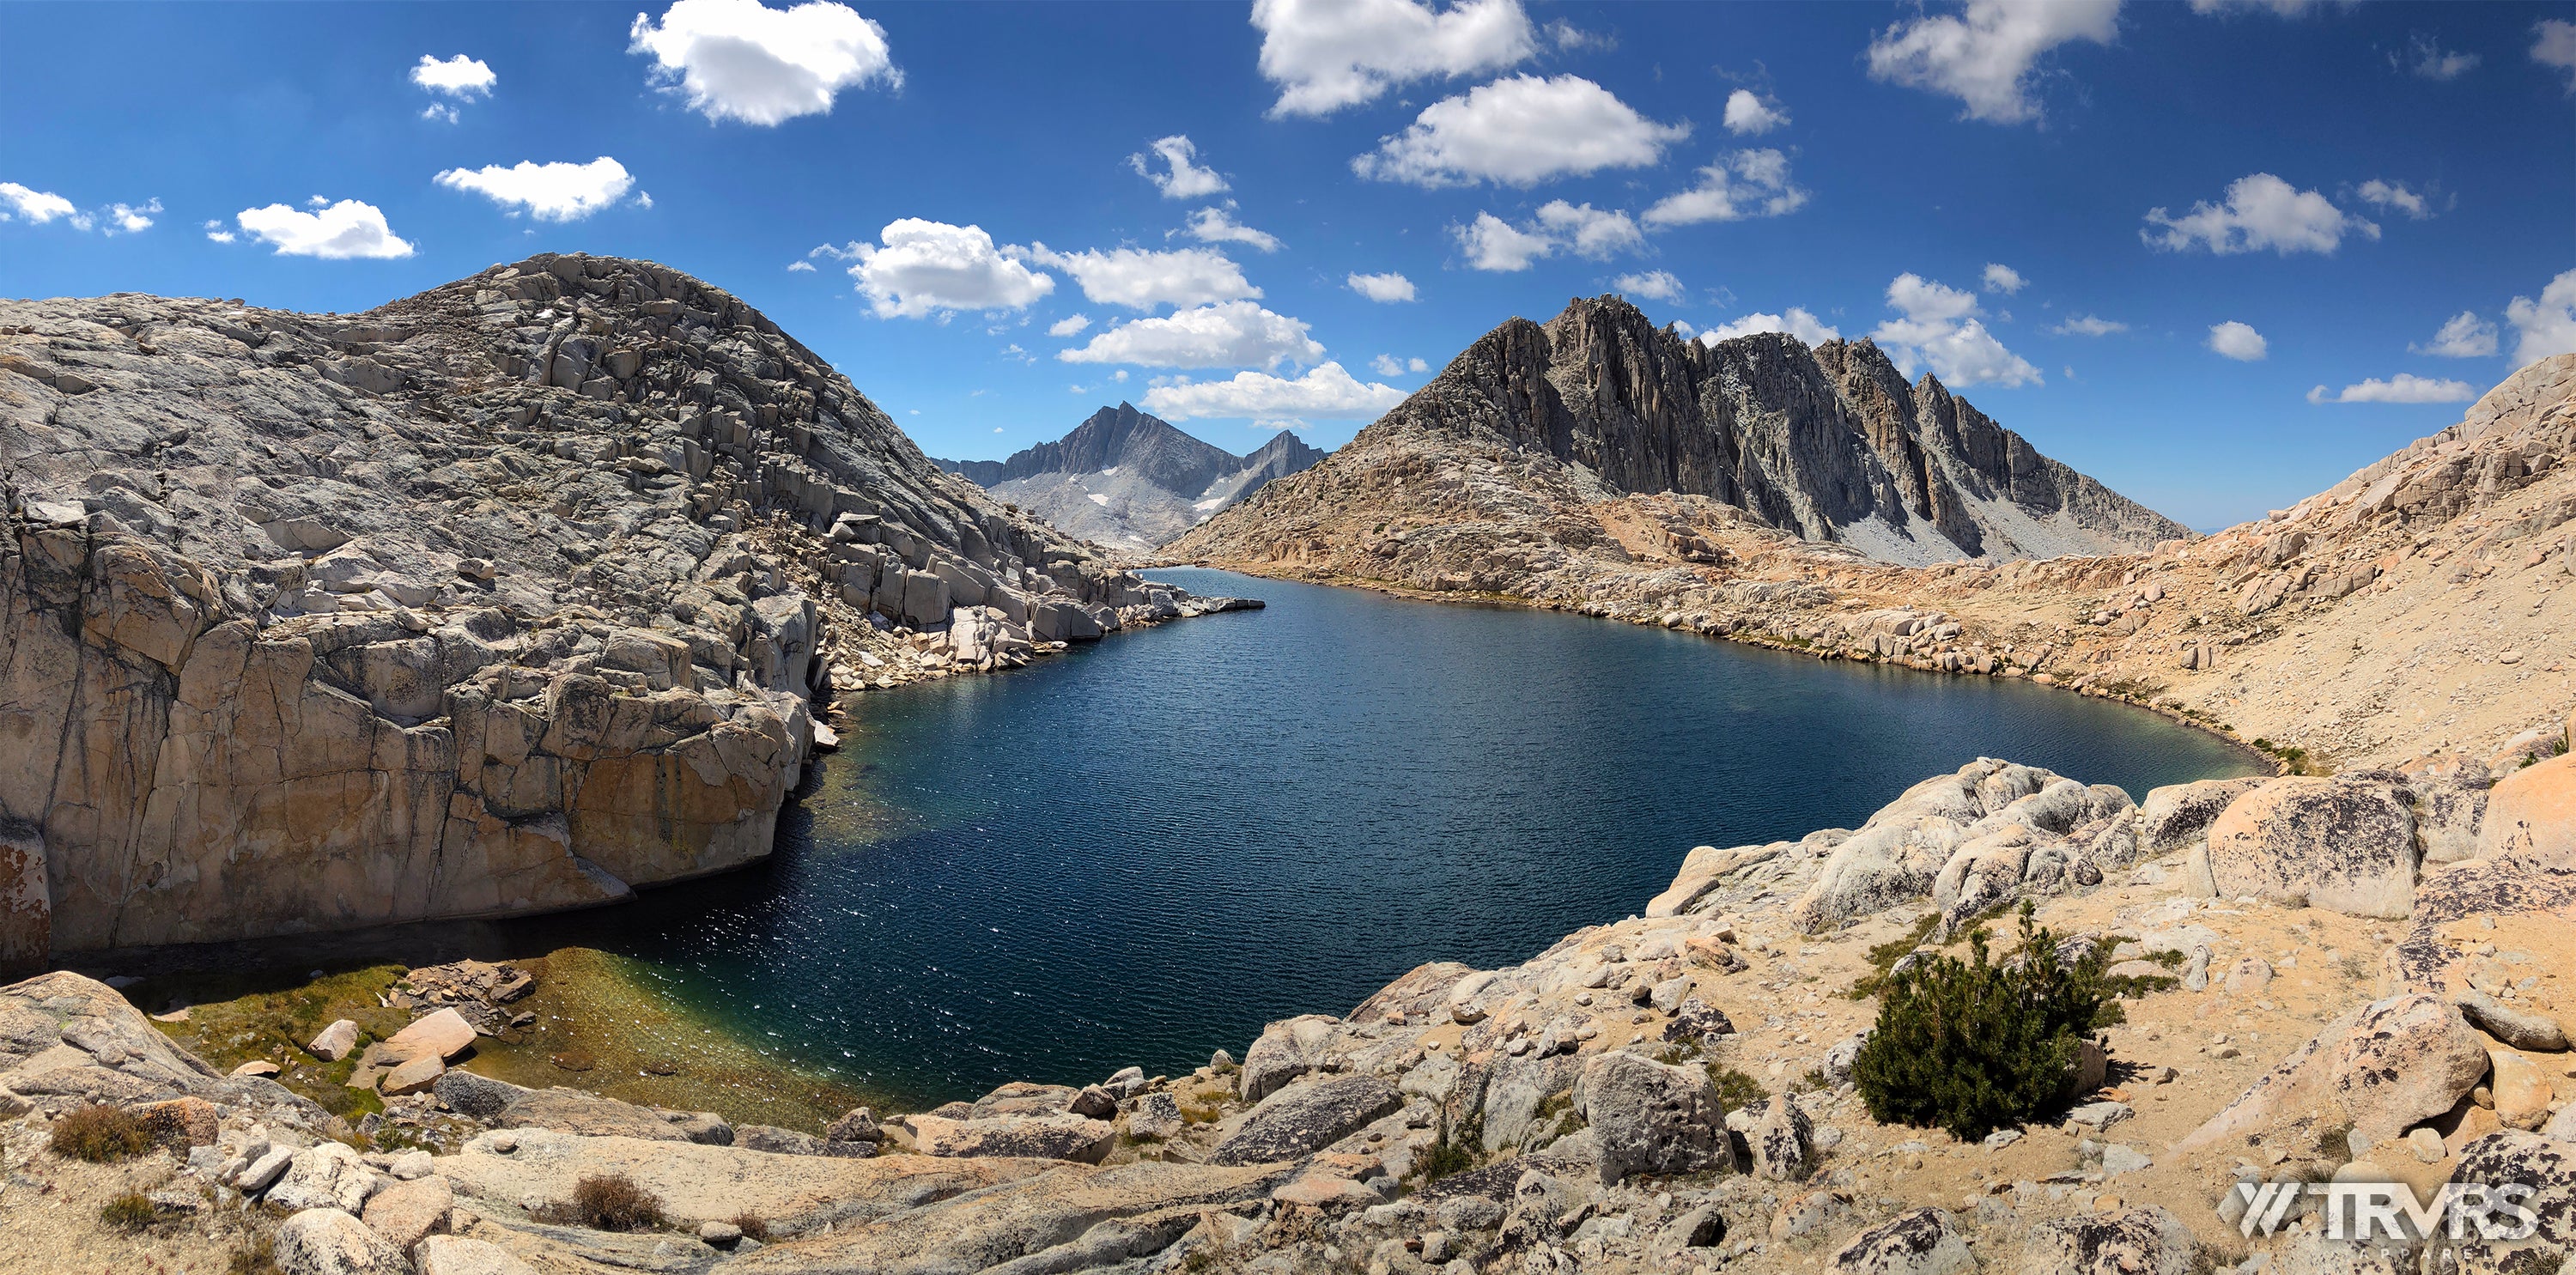 White Bear Lake Sierra High Route 2018 Inyo National Forest, Sequoia Kings Canyon Yosemite Ansel Adams TRVRS Apparel